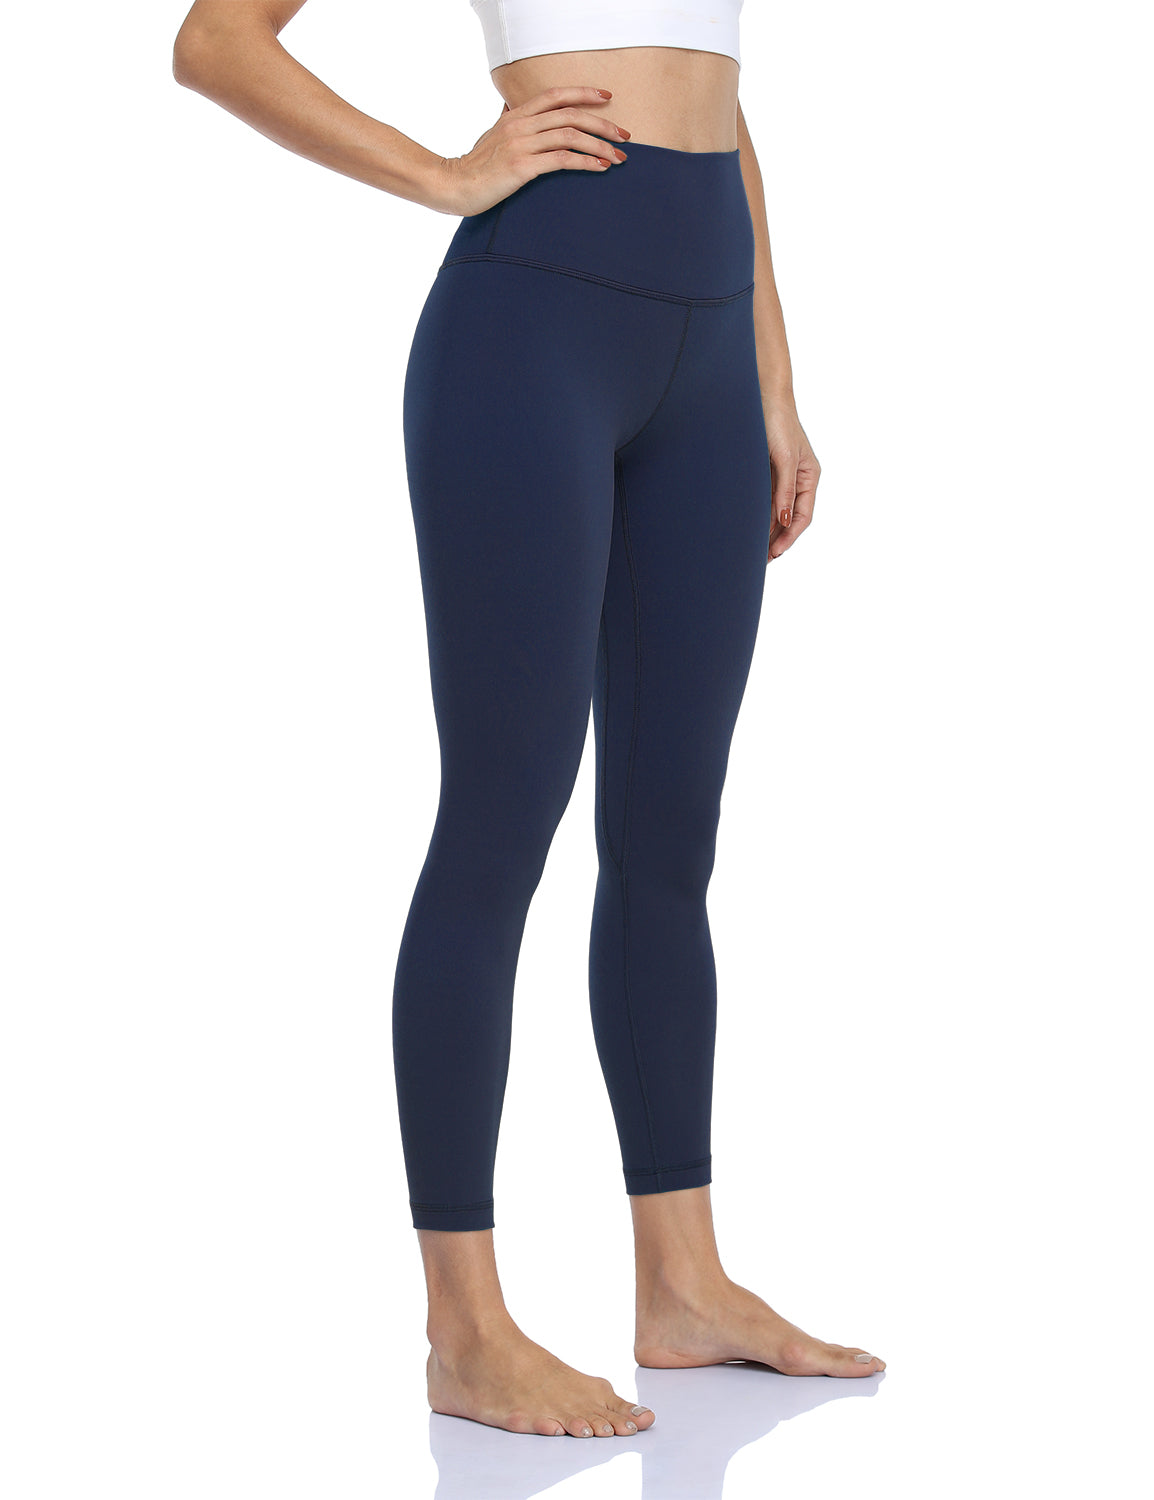 HeyNuts Essential 78 Leggings with Side Pockets for Ethiopia